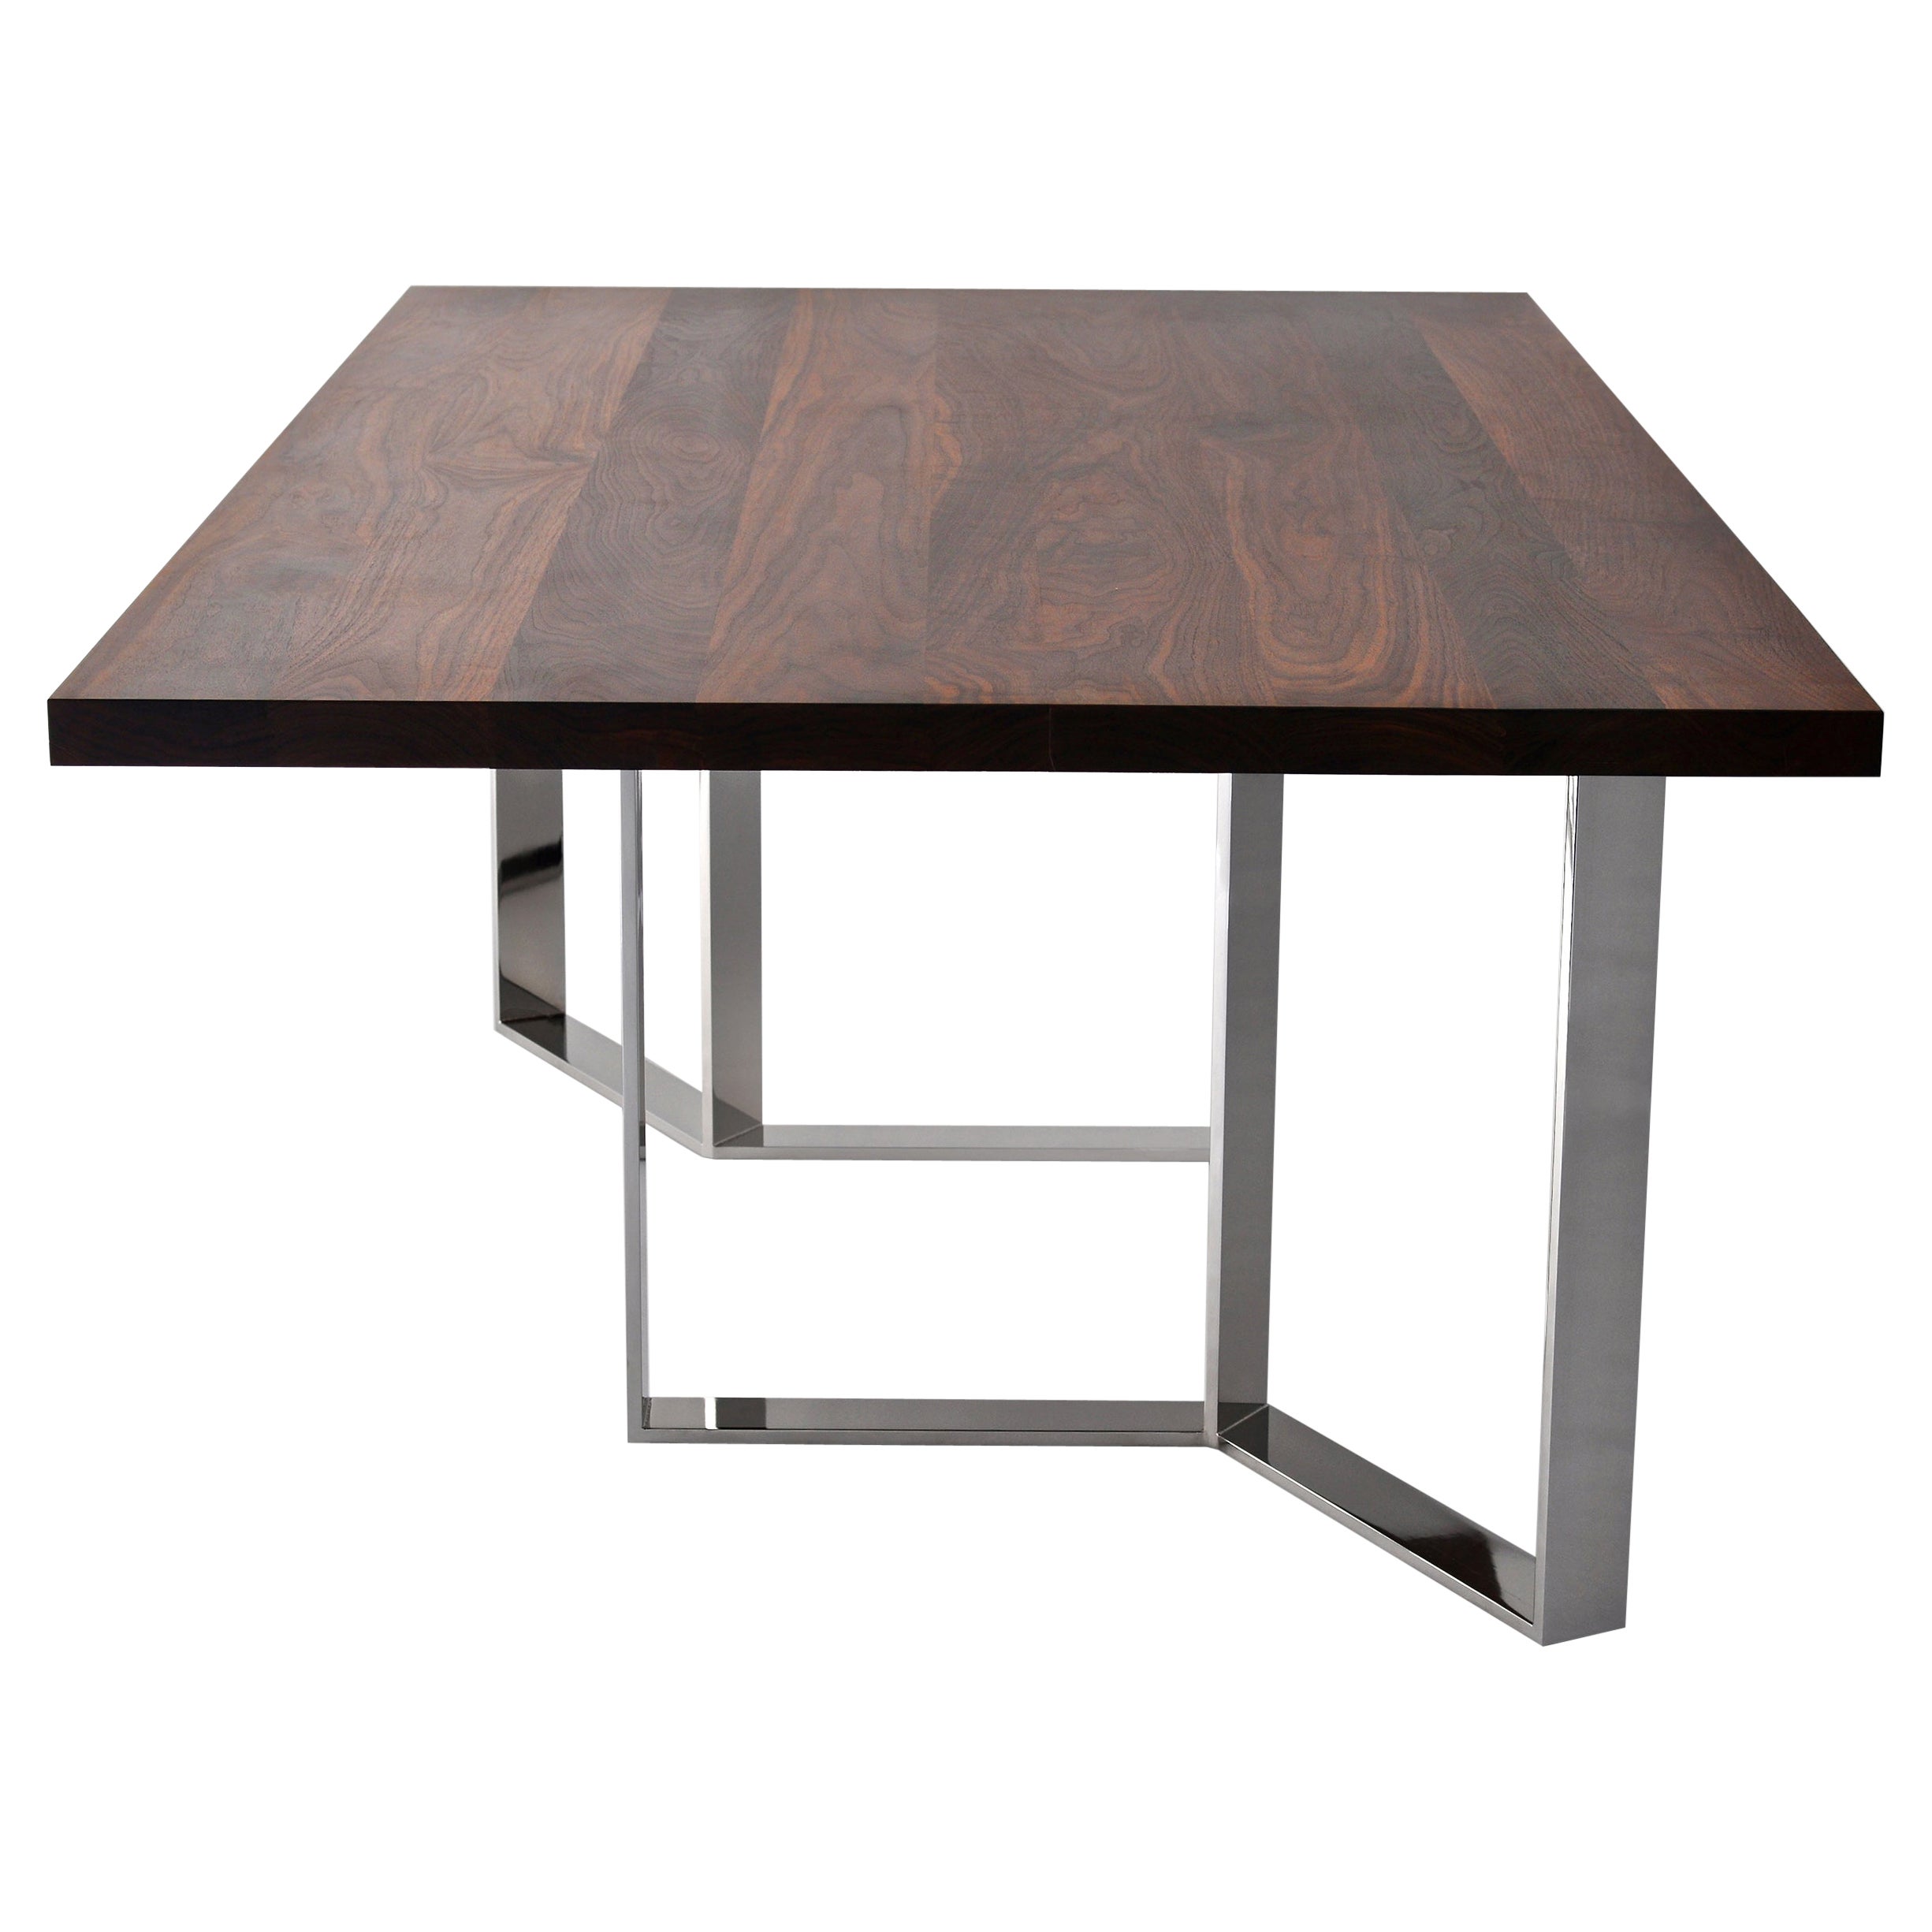 Roundhouse Table by Phase Design For Sale